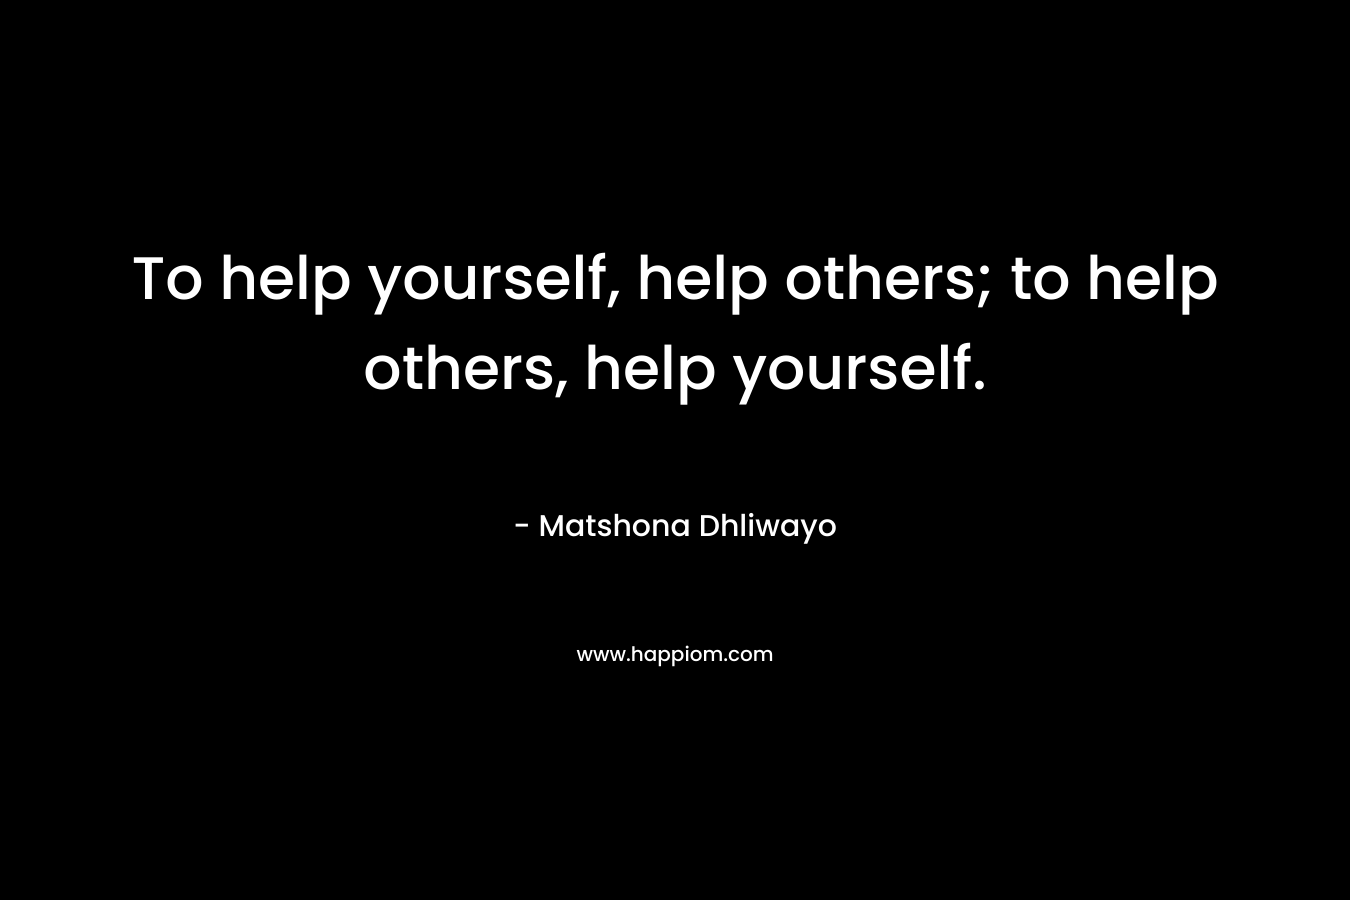 To help yourself, help others; to help others, help yourself.